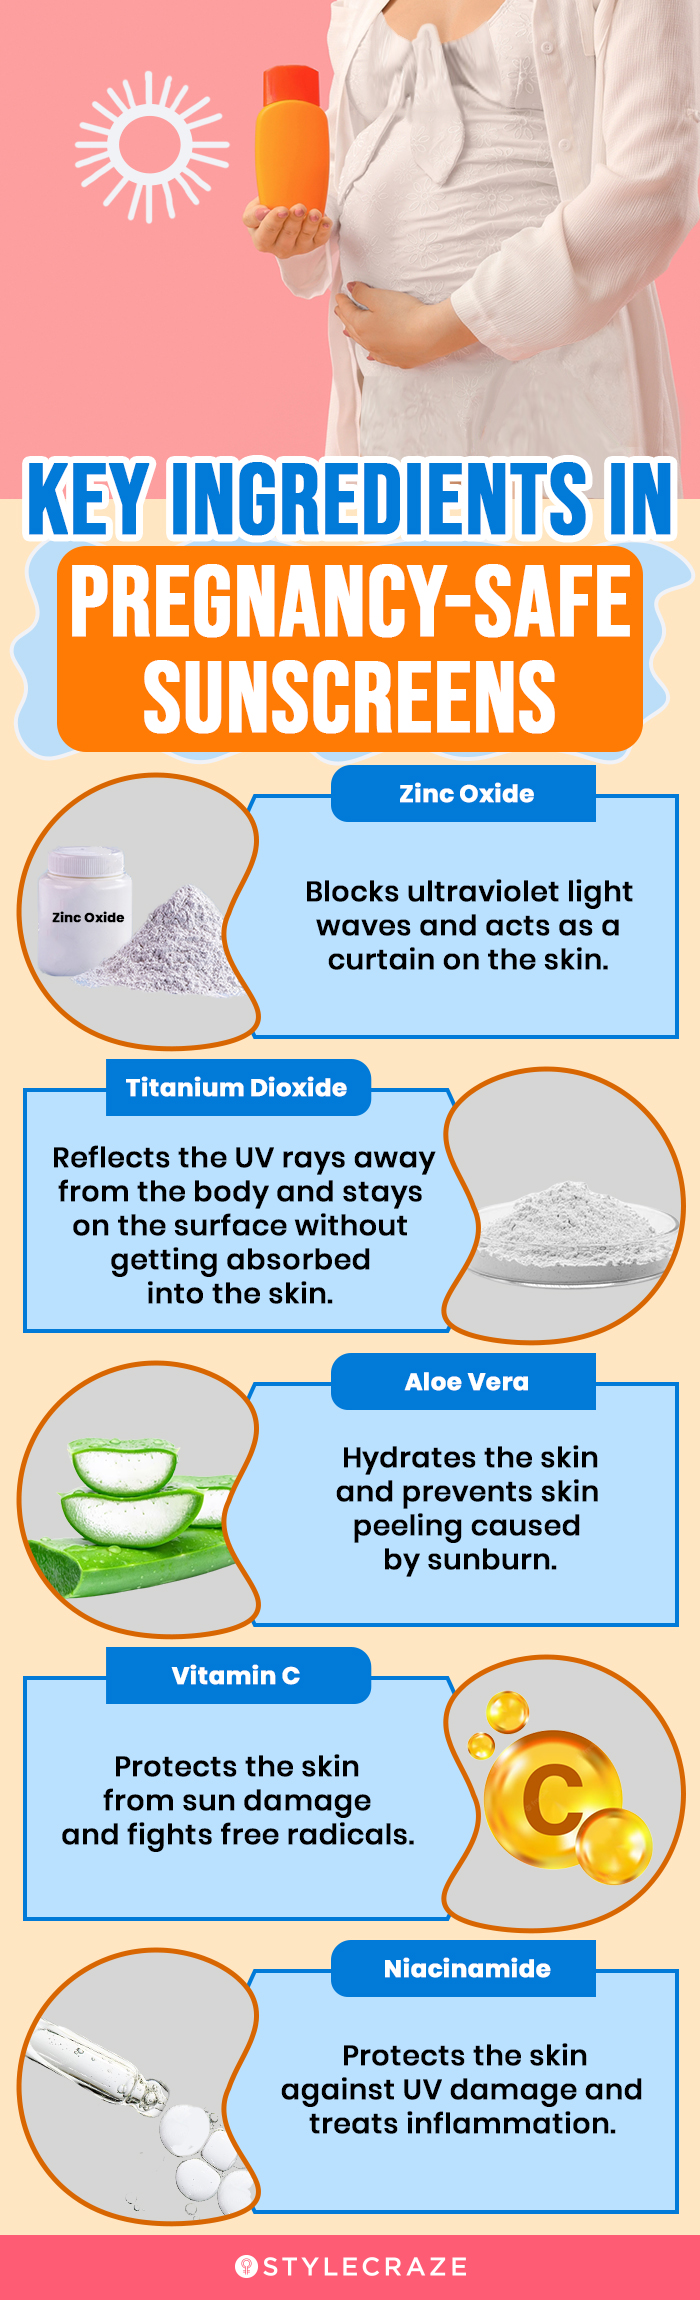 Key Ingredients In Pregnancy-Safe Sunscreens (infographic)